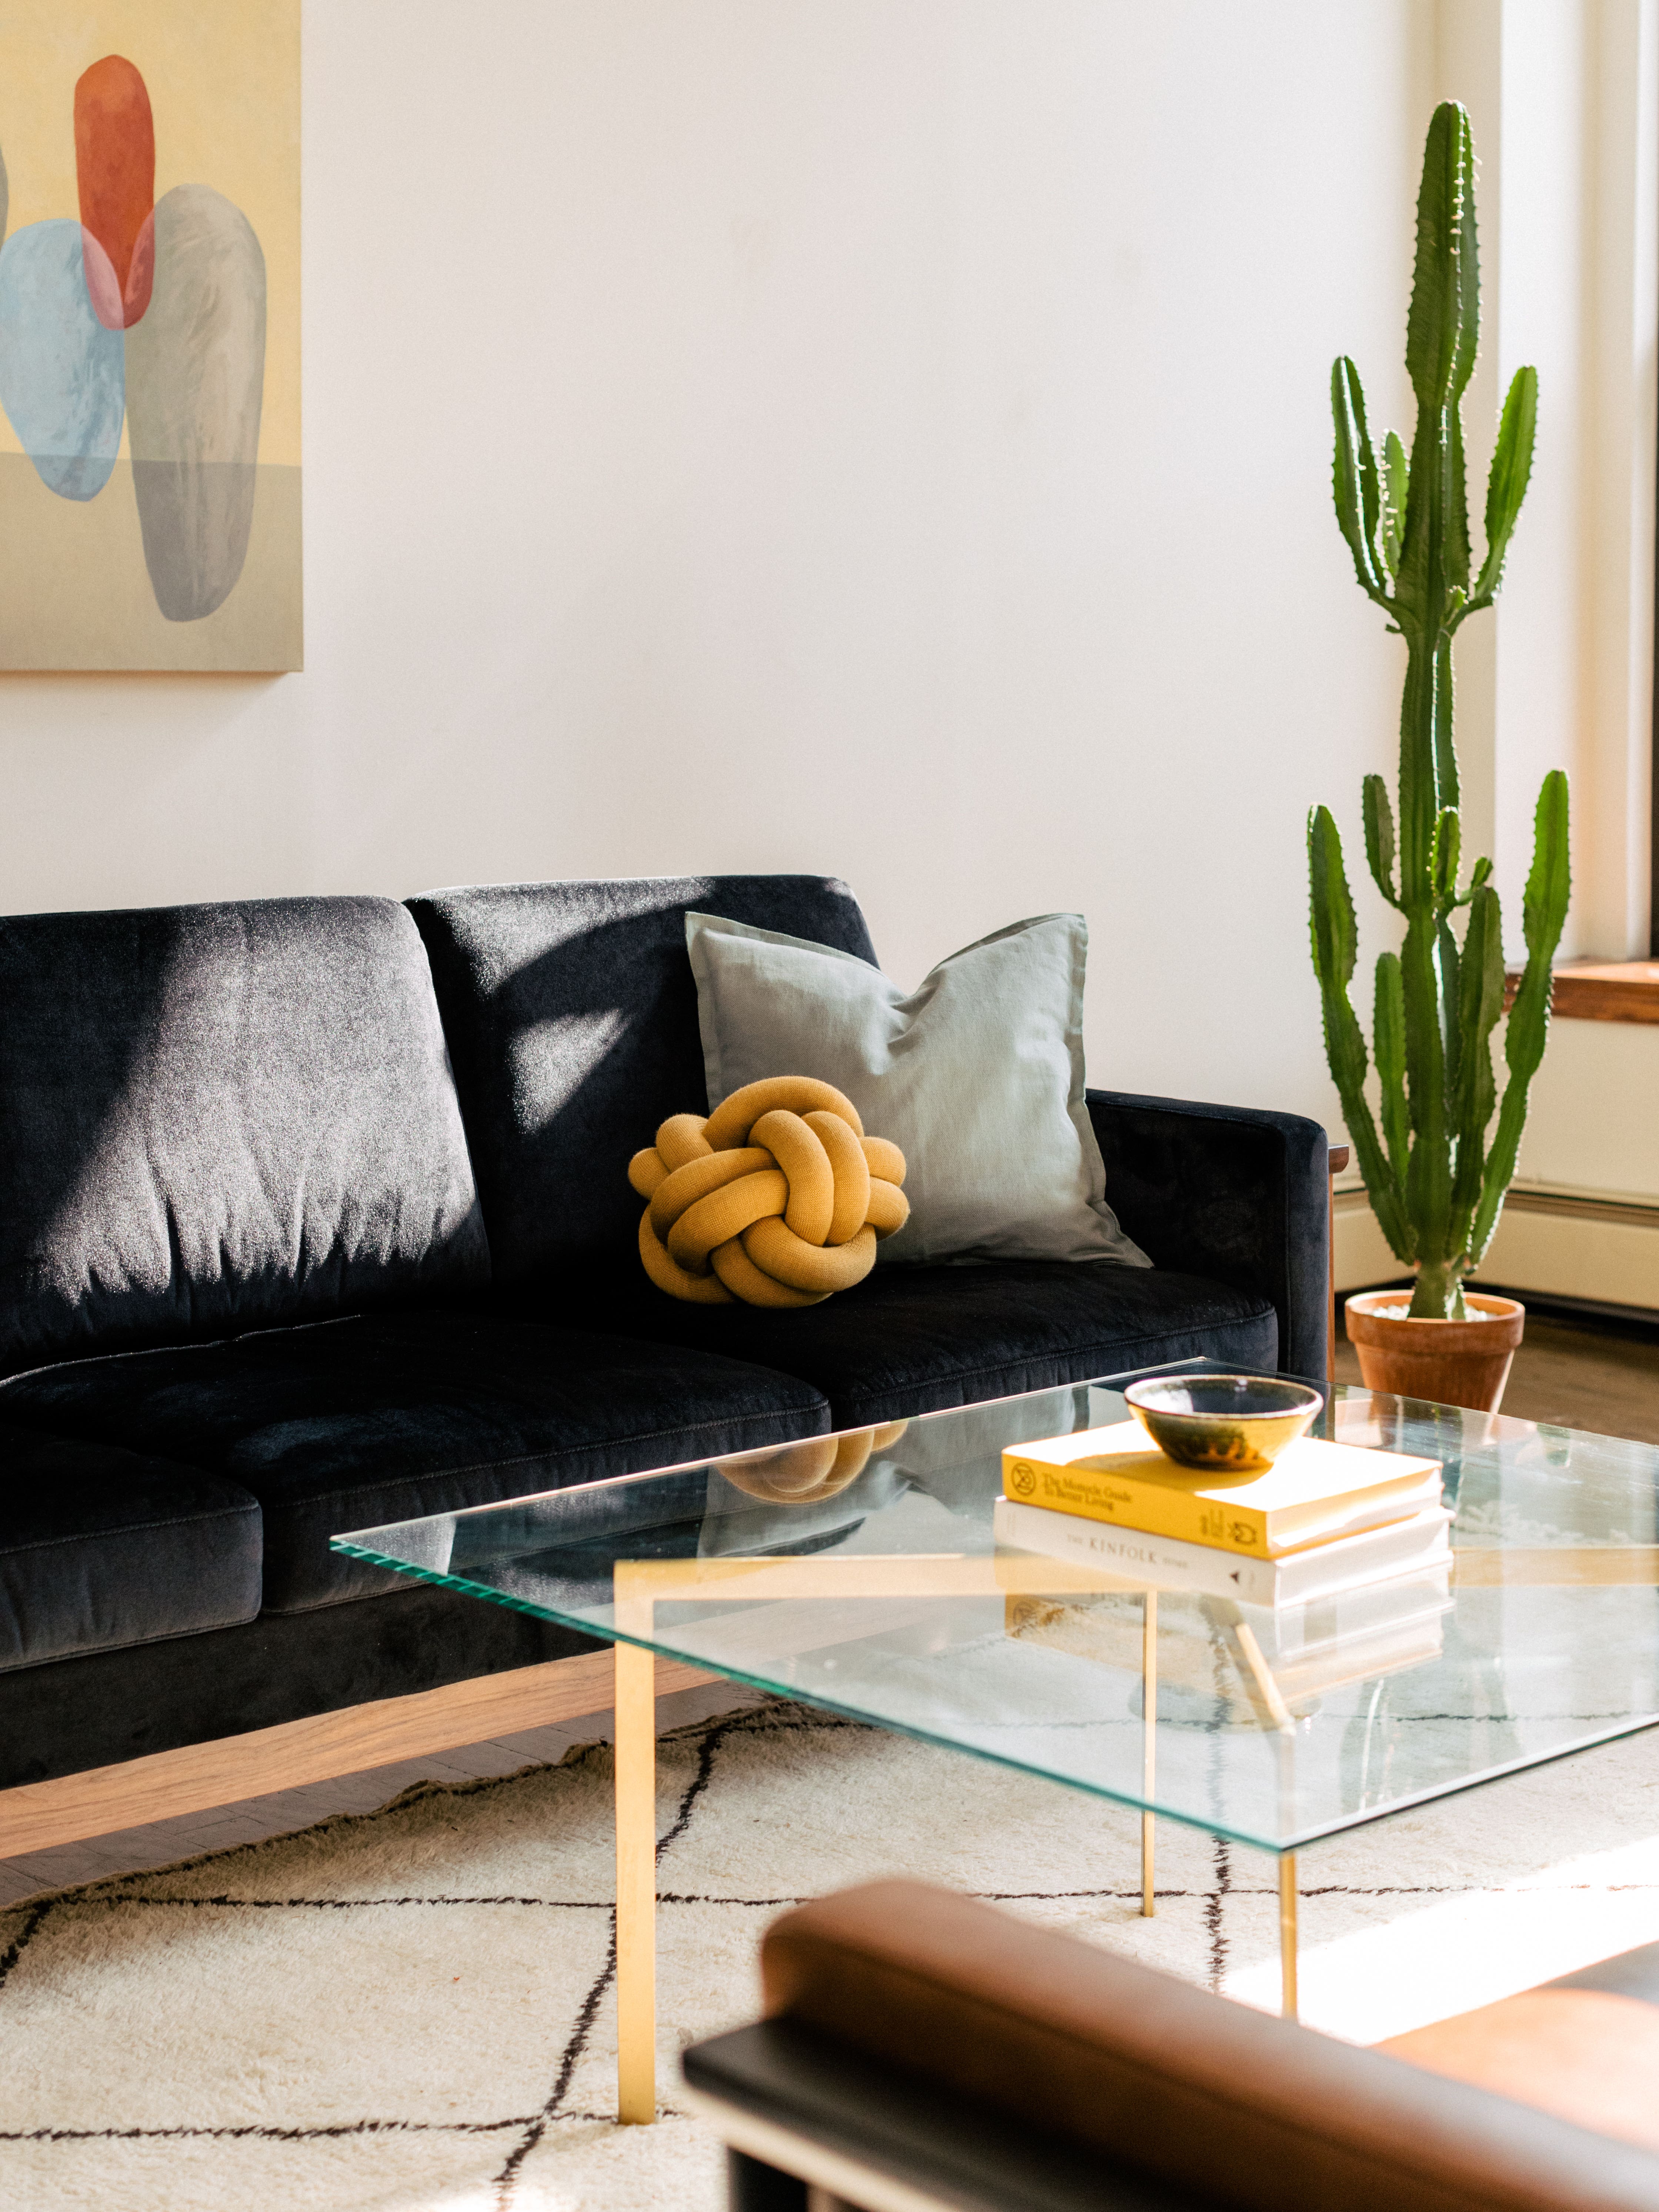 Jason Wu Just Debuted an Affordable Mid-Century Furniture Line